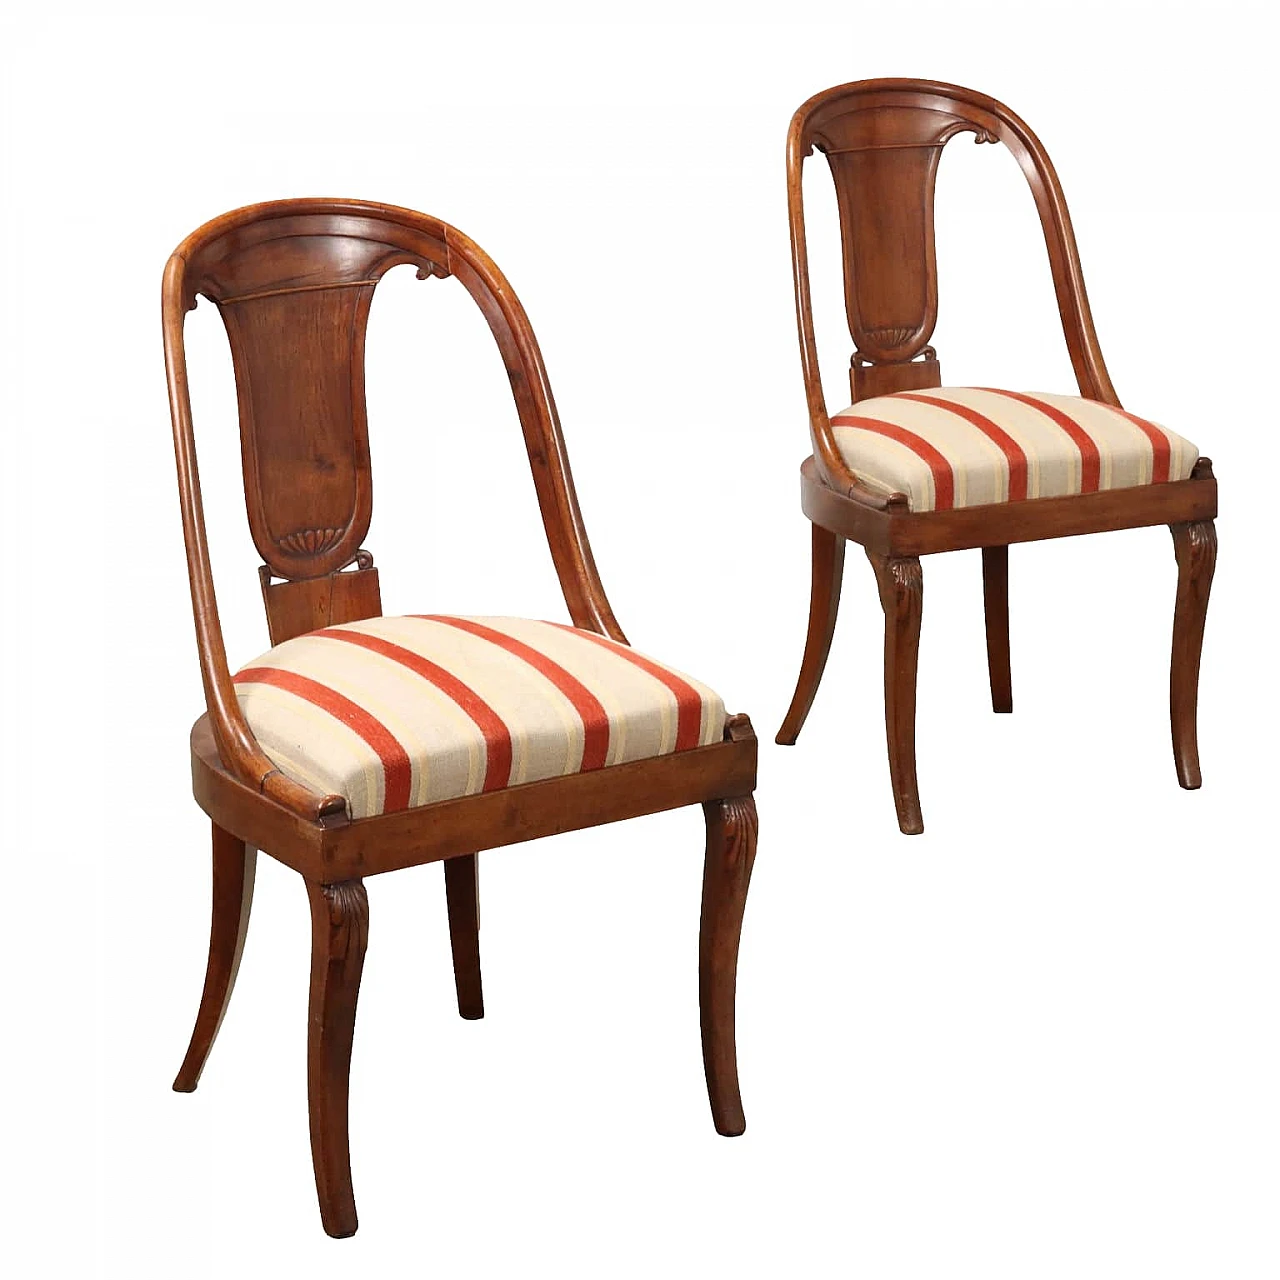 Pair of walnut gondola chairs with padded seat, 19th century 1